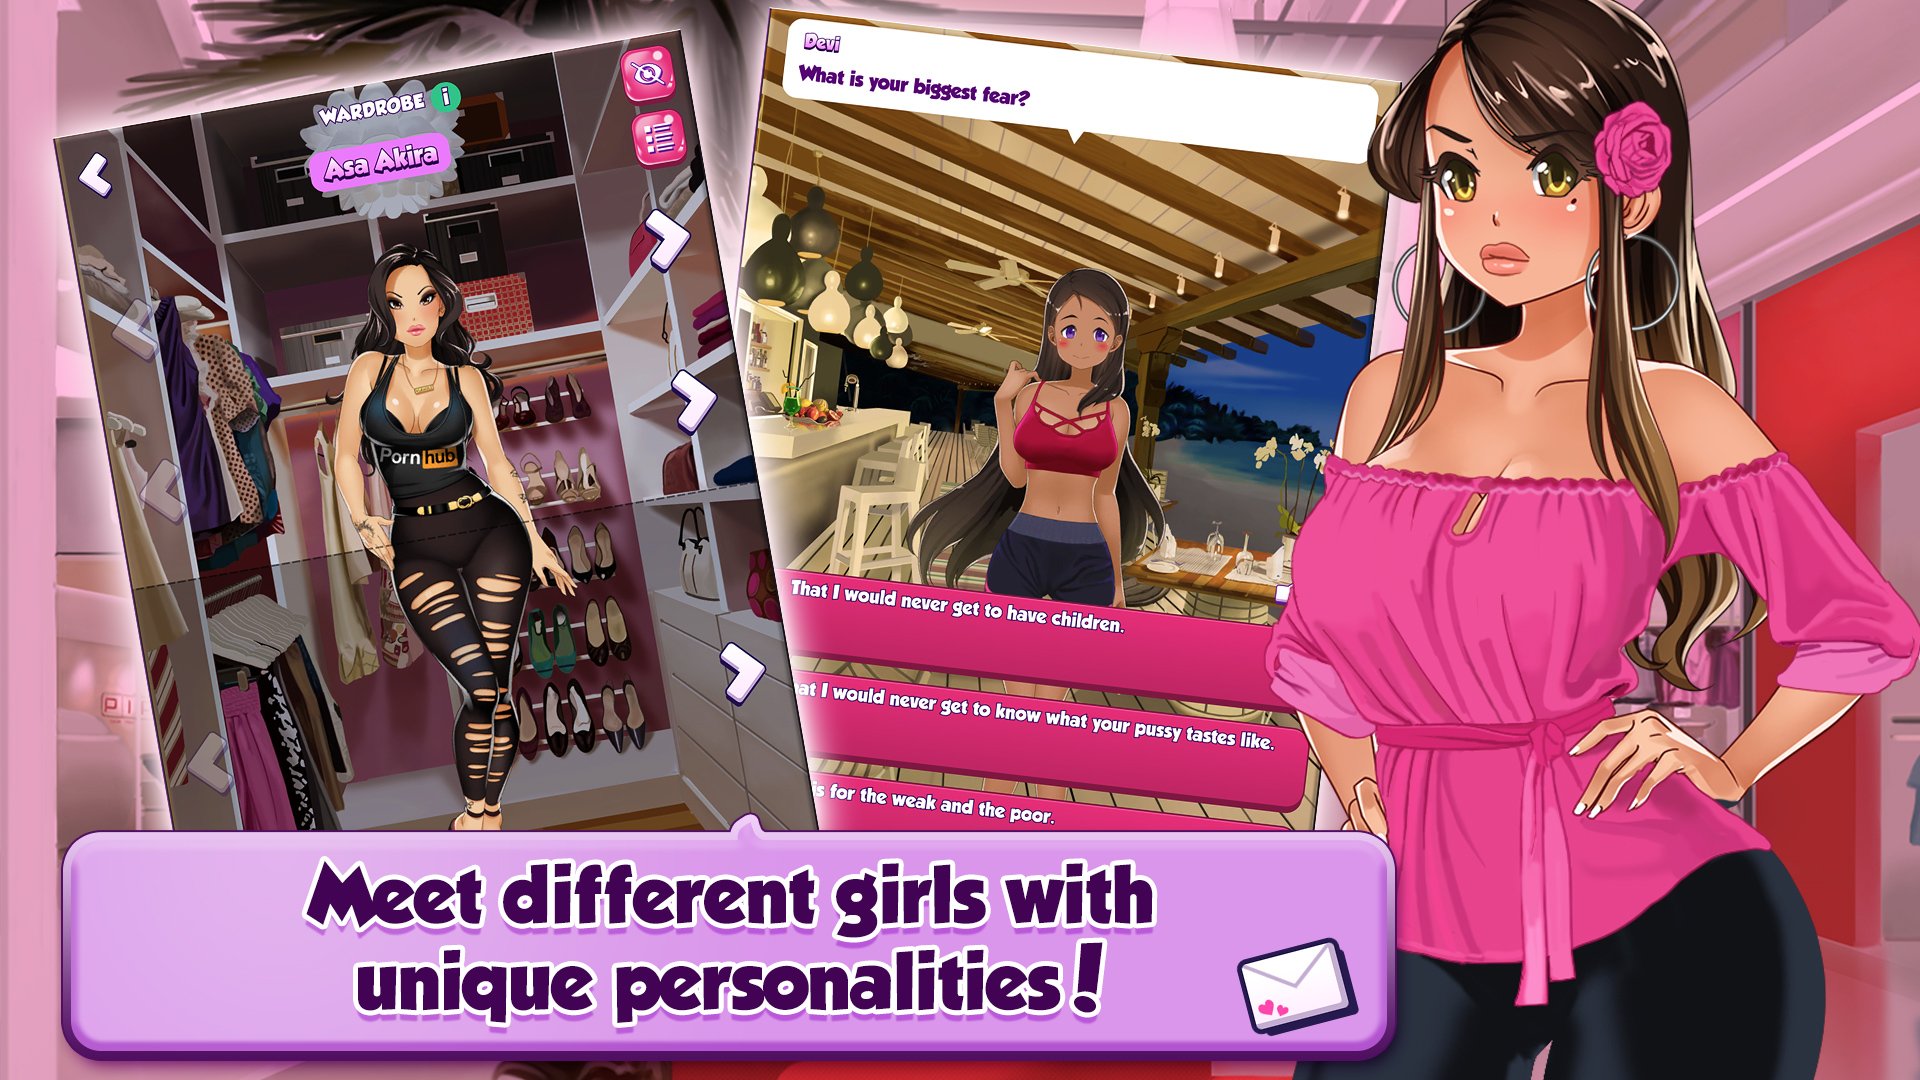 Play Booty Calls Dating Sim On Android - Android Porn Games-4096